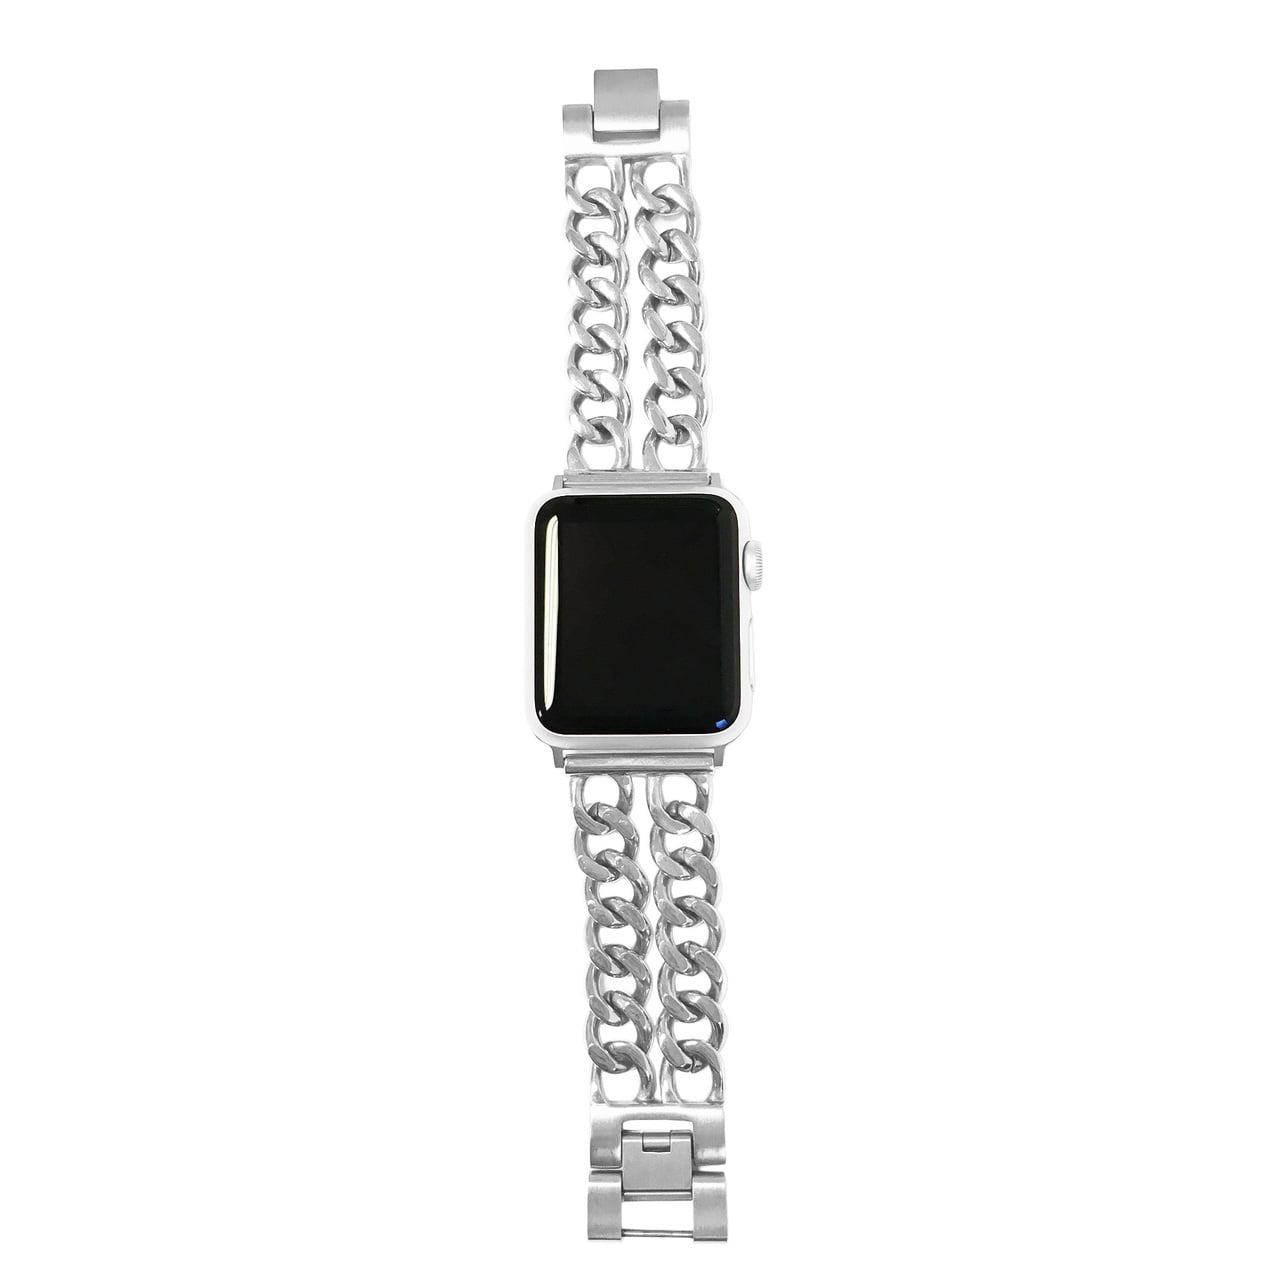 Advanced & Niche Side Chain iWatch Band – Aes Watch Band